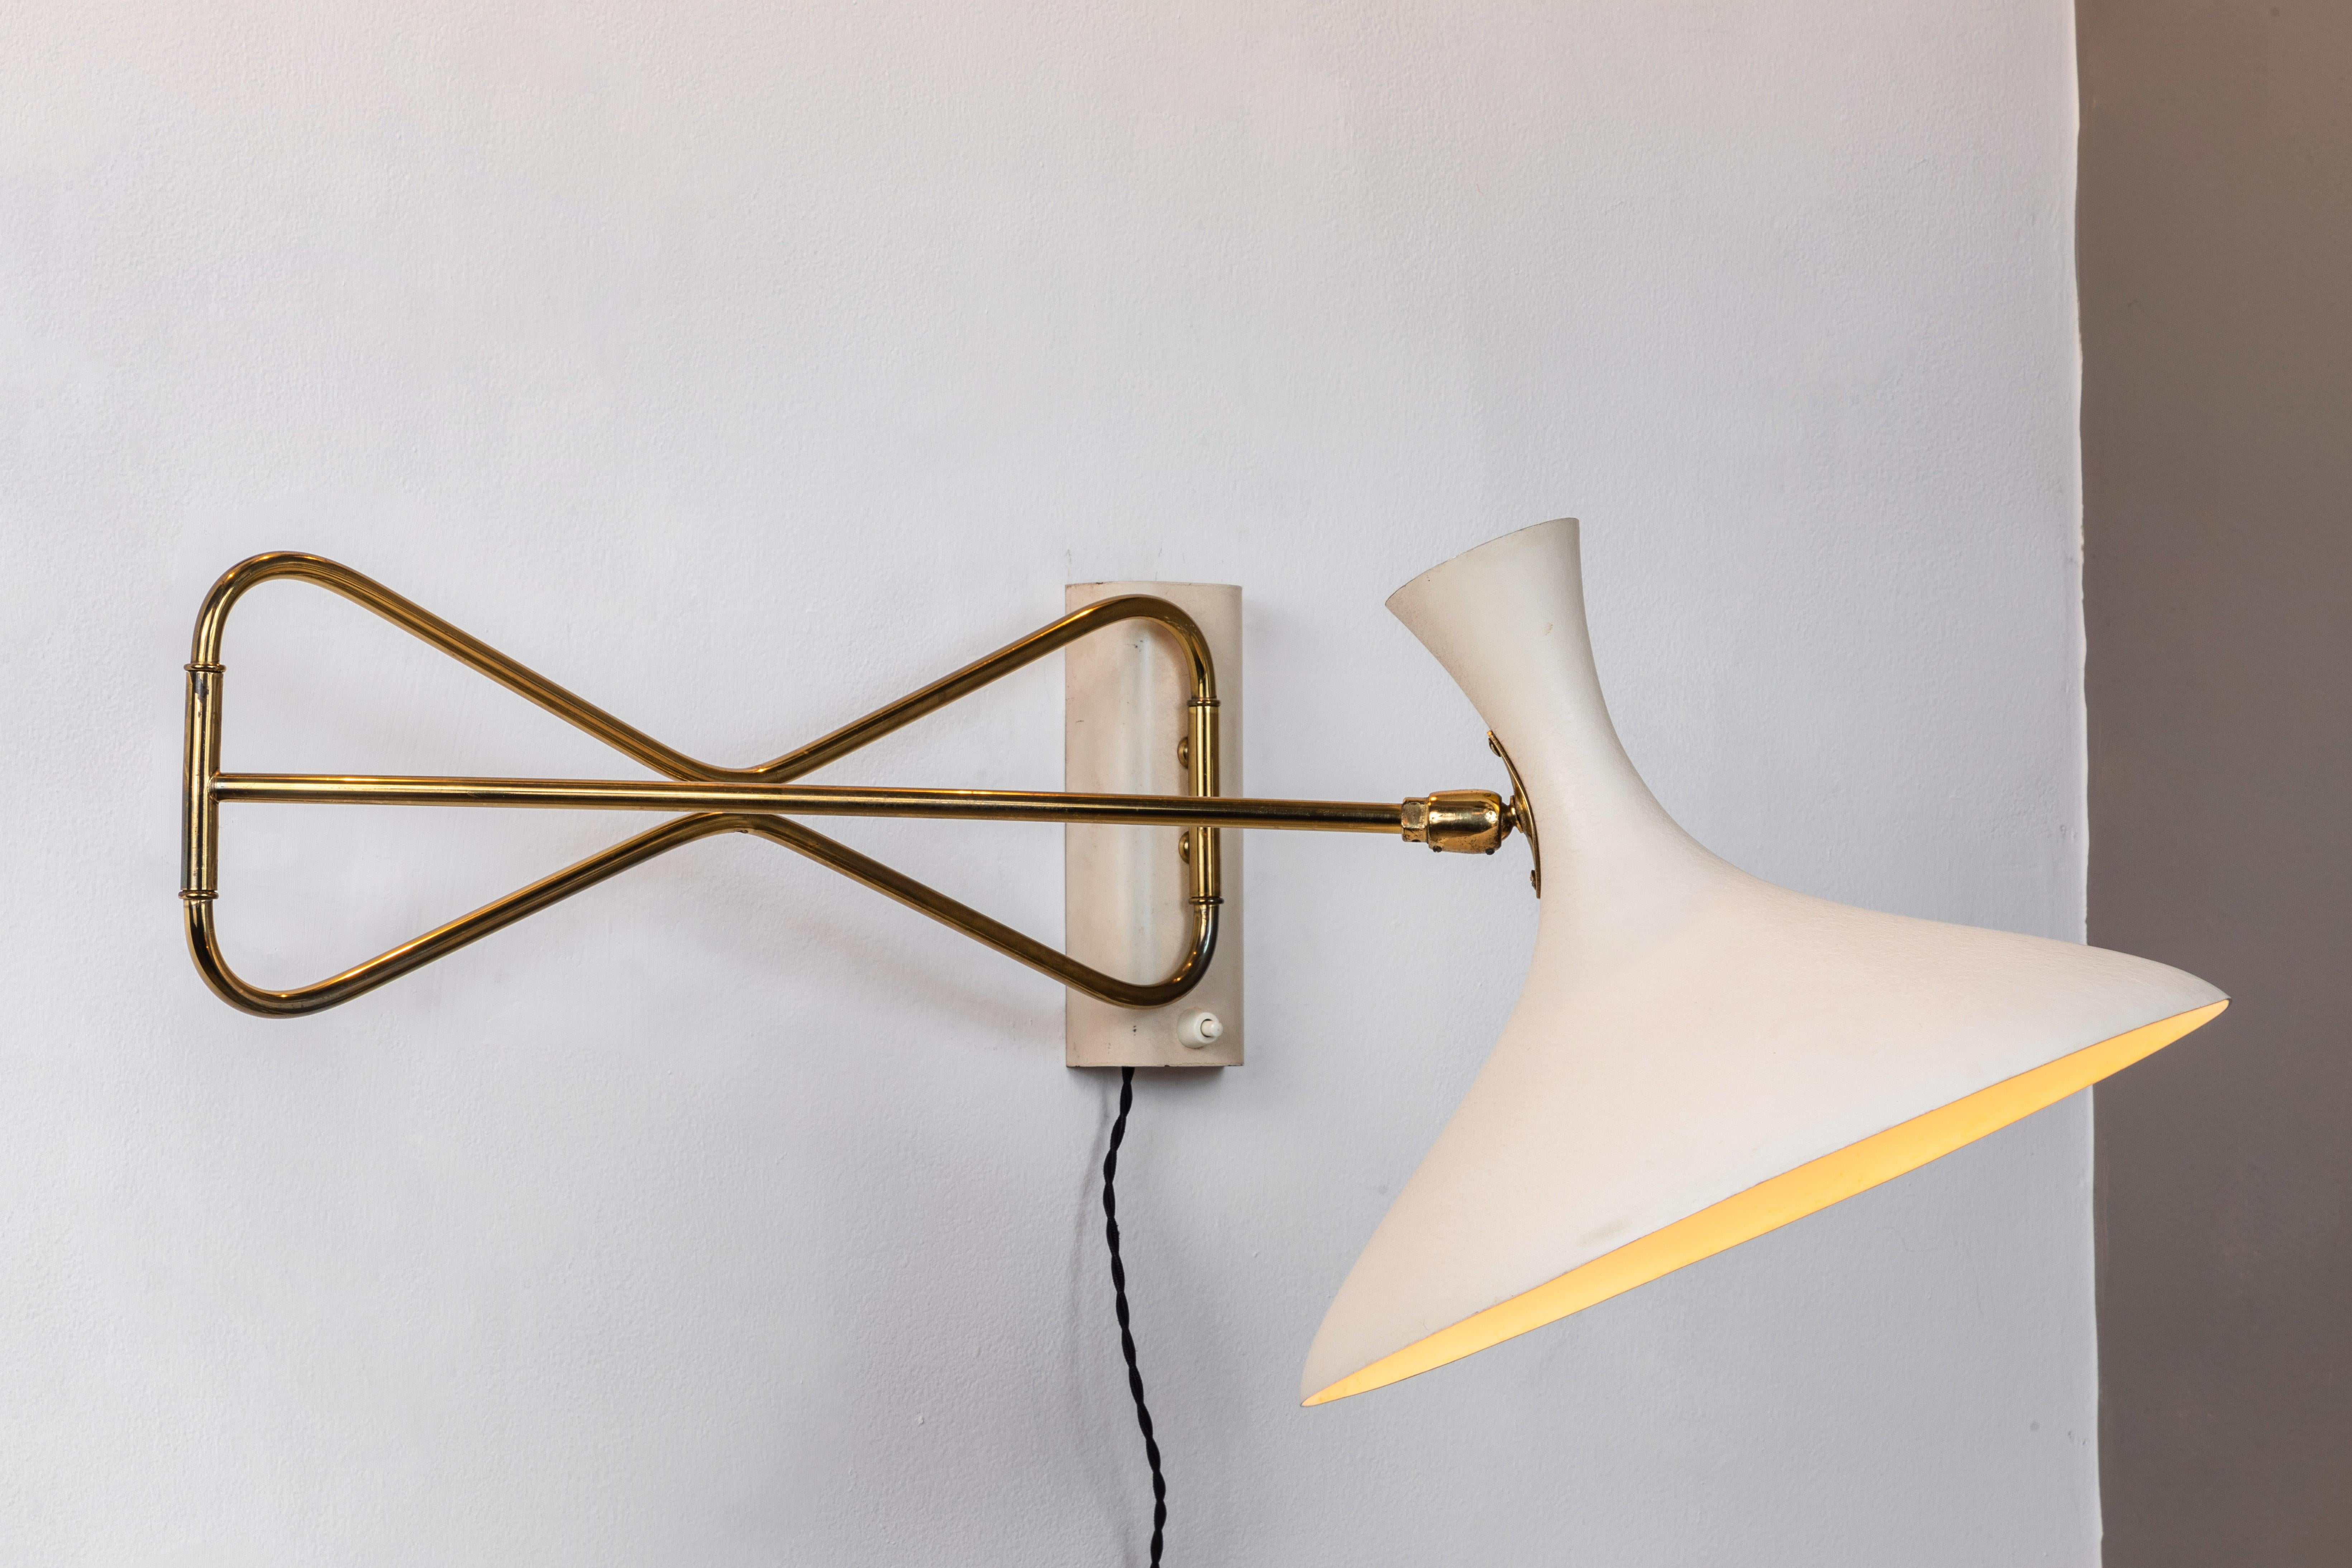 Large 1950s Cosack Leuchten articulating wall light. Executed in white and black painted metal and brass in the manner of Stilnovo, circa 1950s. A very architectural and large scale wall lamp that can be easily adjusted to various lengths and